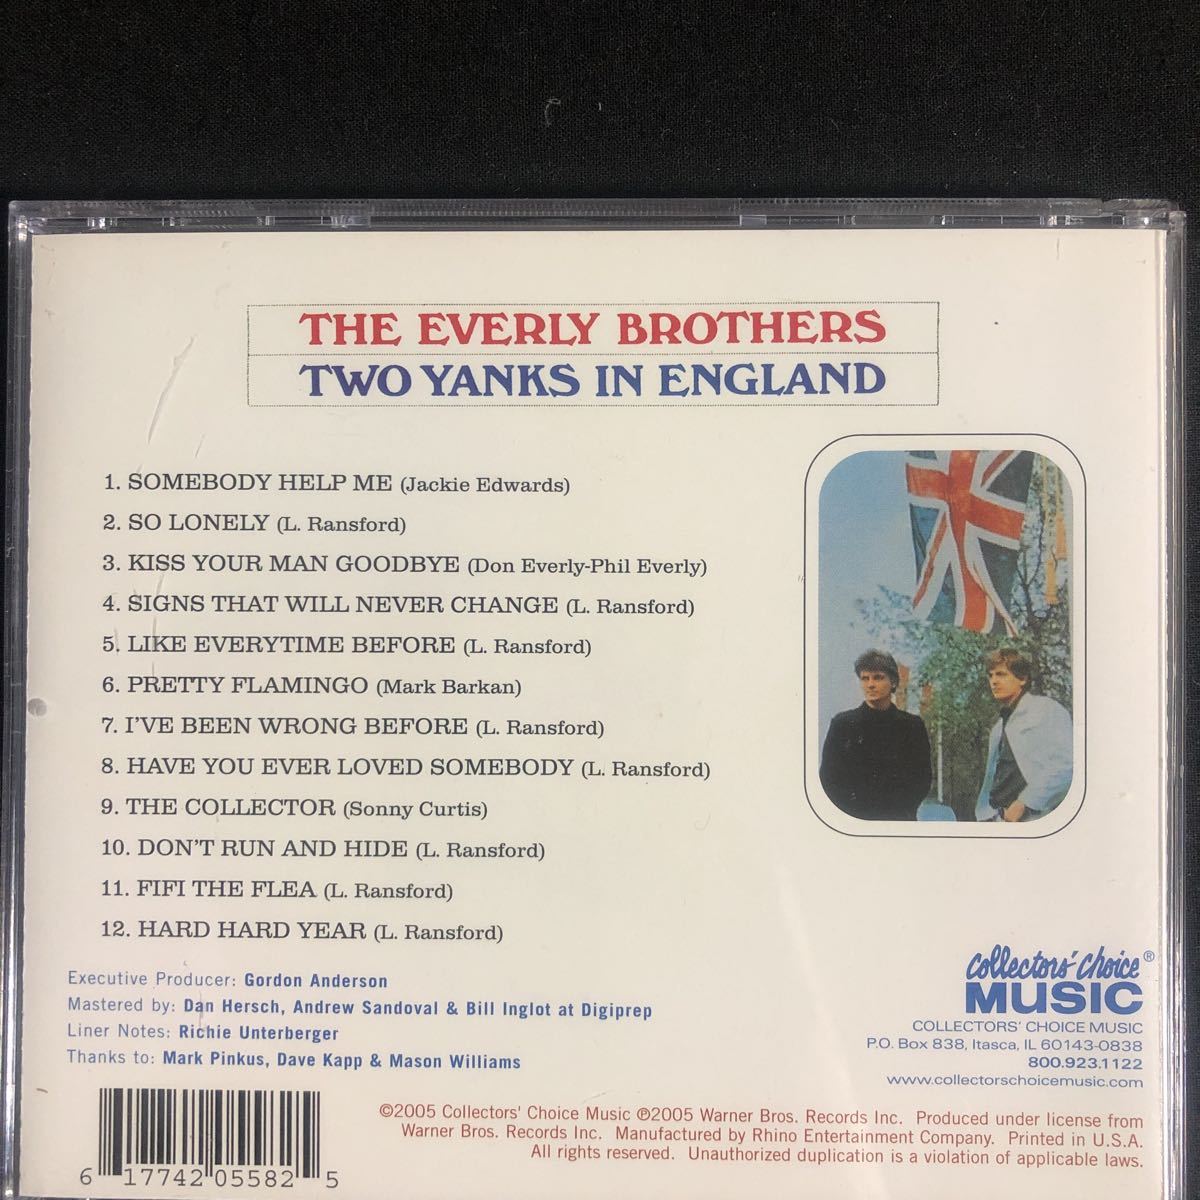 JIMMY PAGE参加！EVERY BROTHERS/エヴァリーブラザーズ/TWO YANKS IN ENGLAND/ 2005年